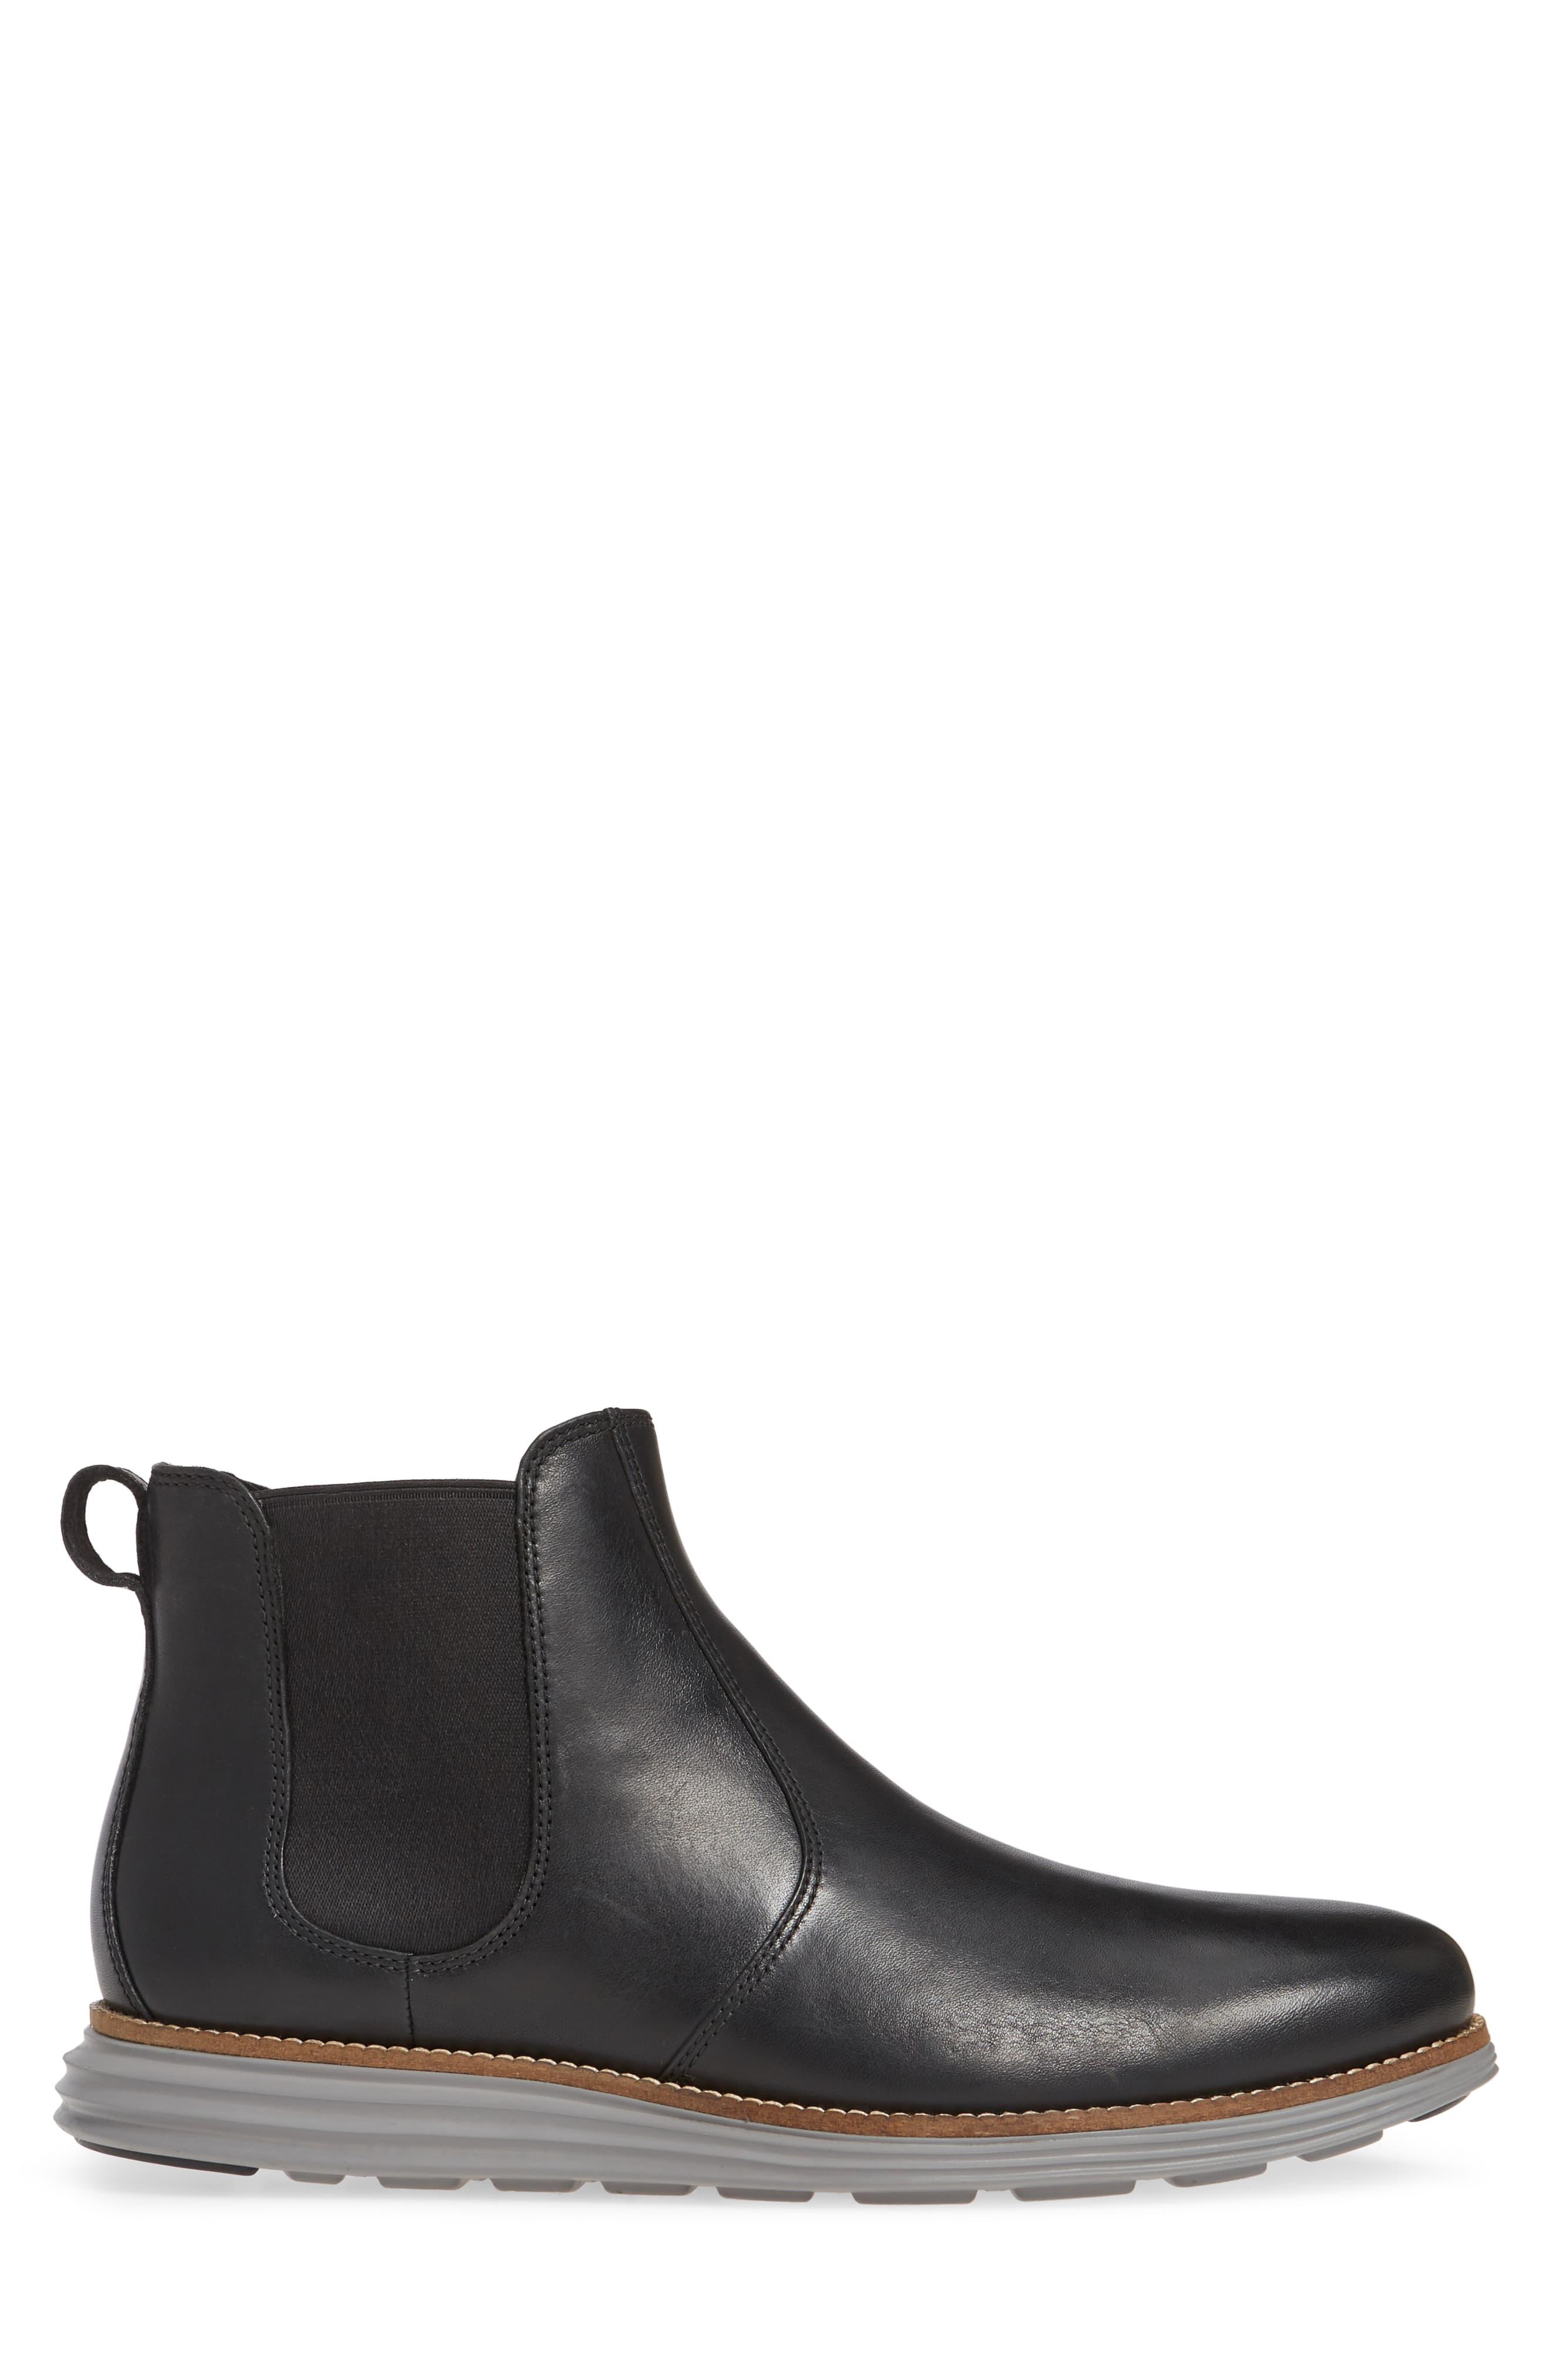 Cole Haan Original Grand Waterproof Leather Chelsea Boots in Black for